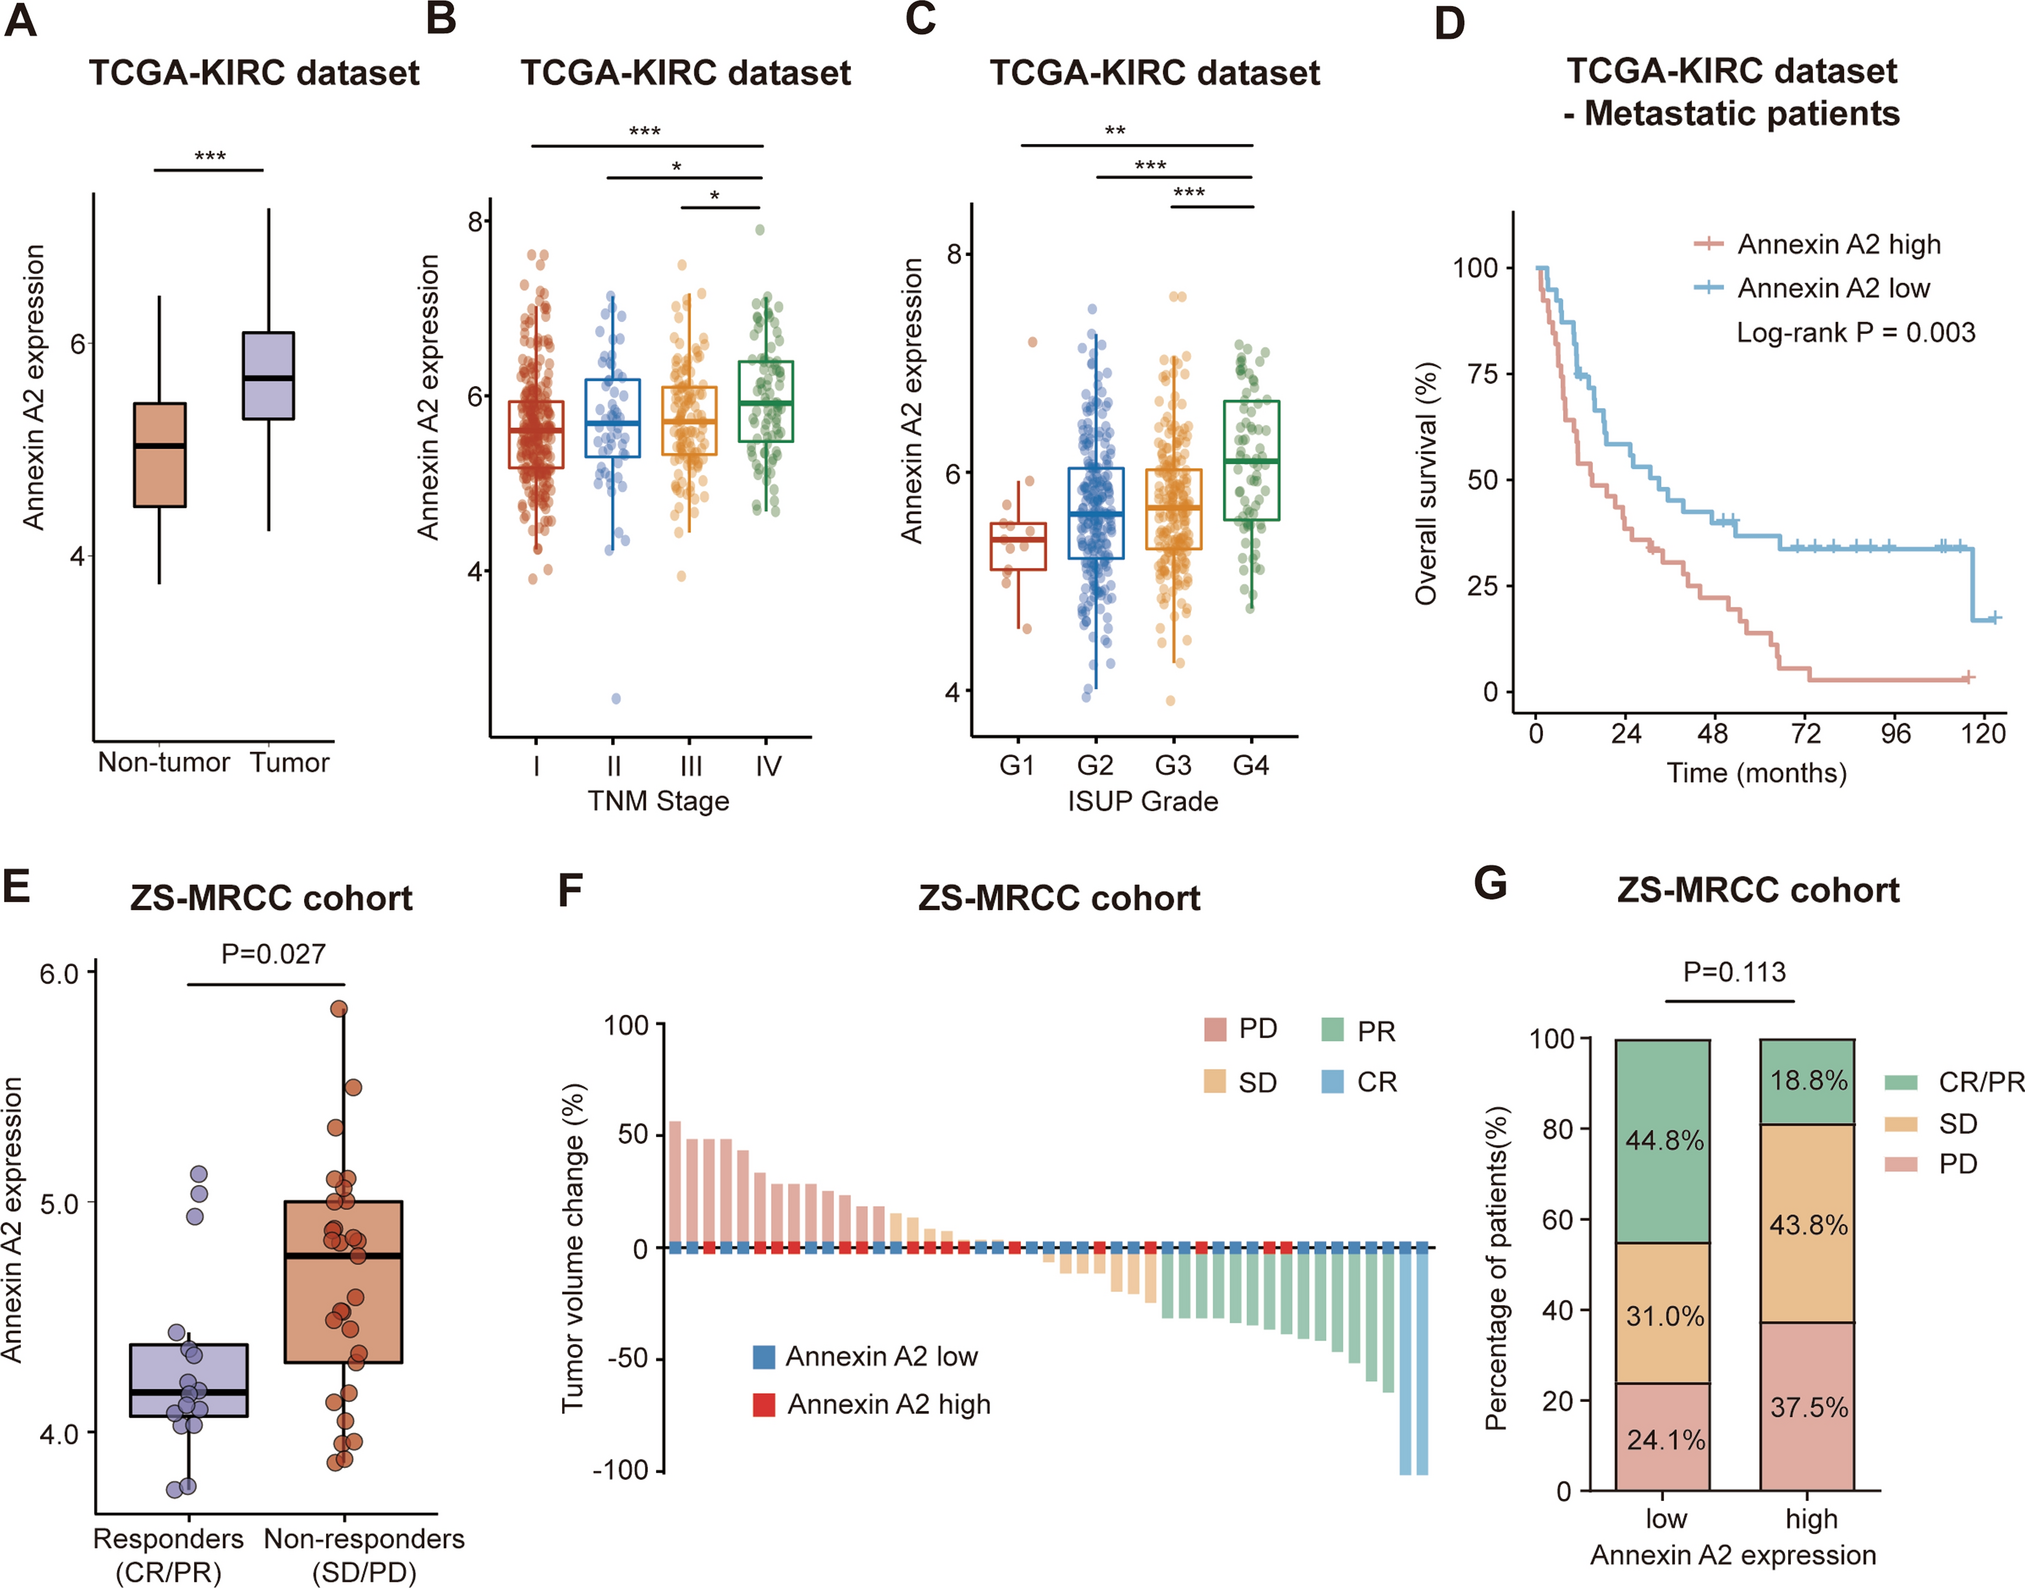 Effect of Annexin A2 on prognosis and sensitivity to immune checkpoint plus tyrosine kinase inhibition in metastatic renal cell carcinoma